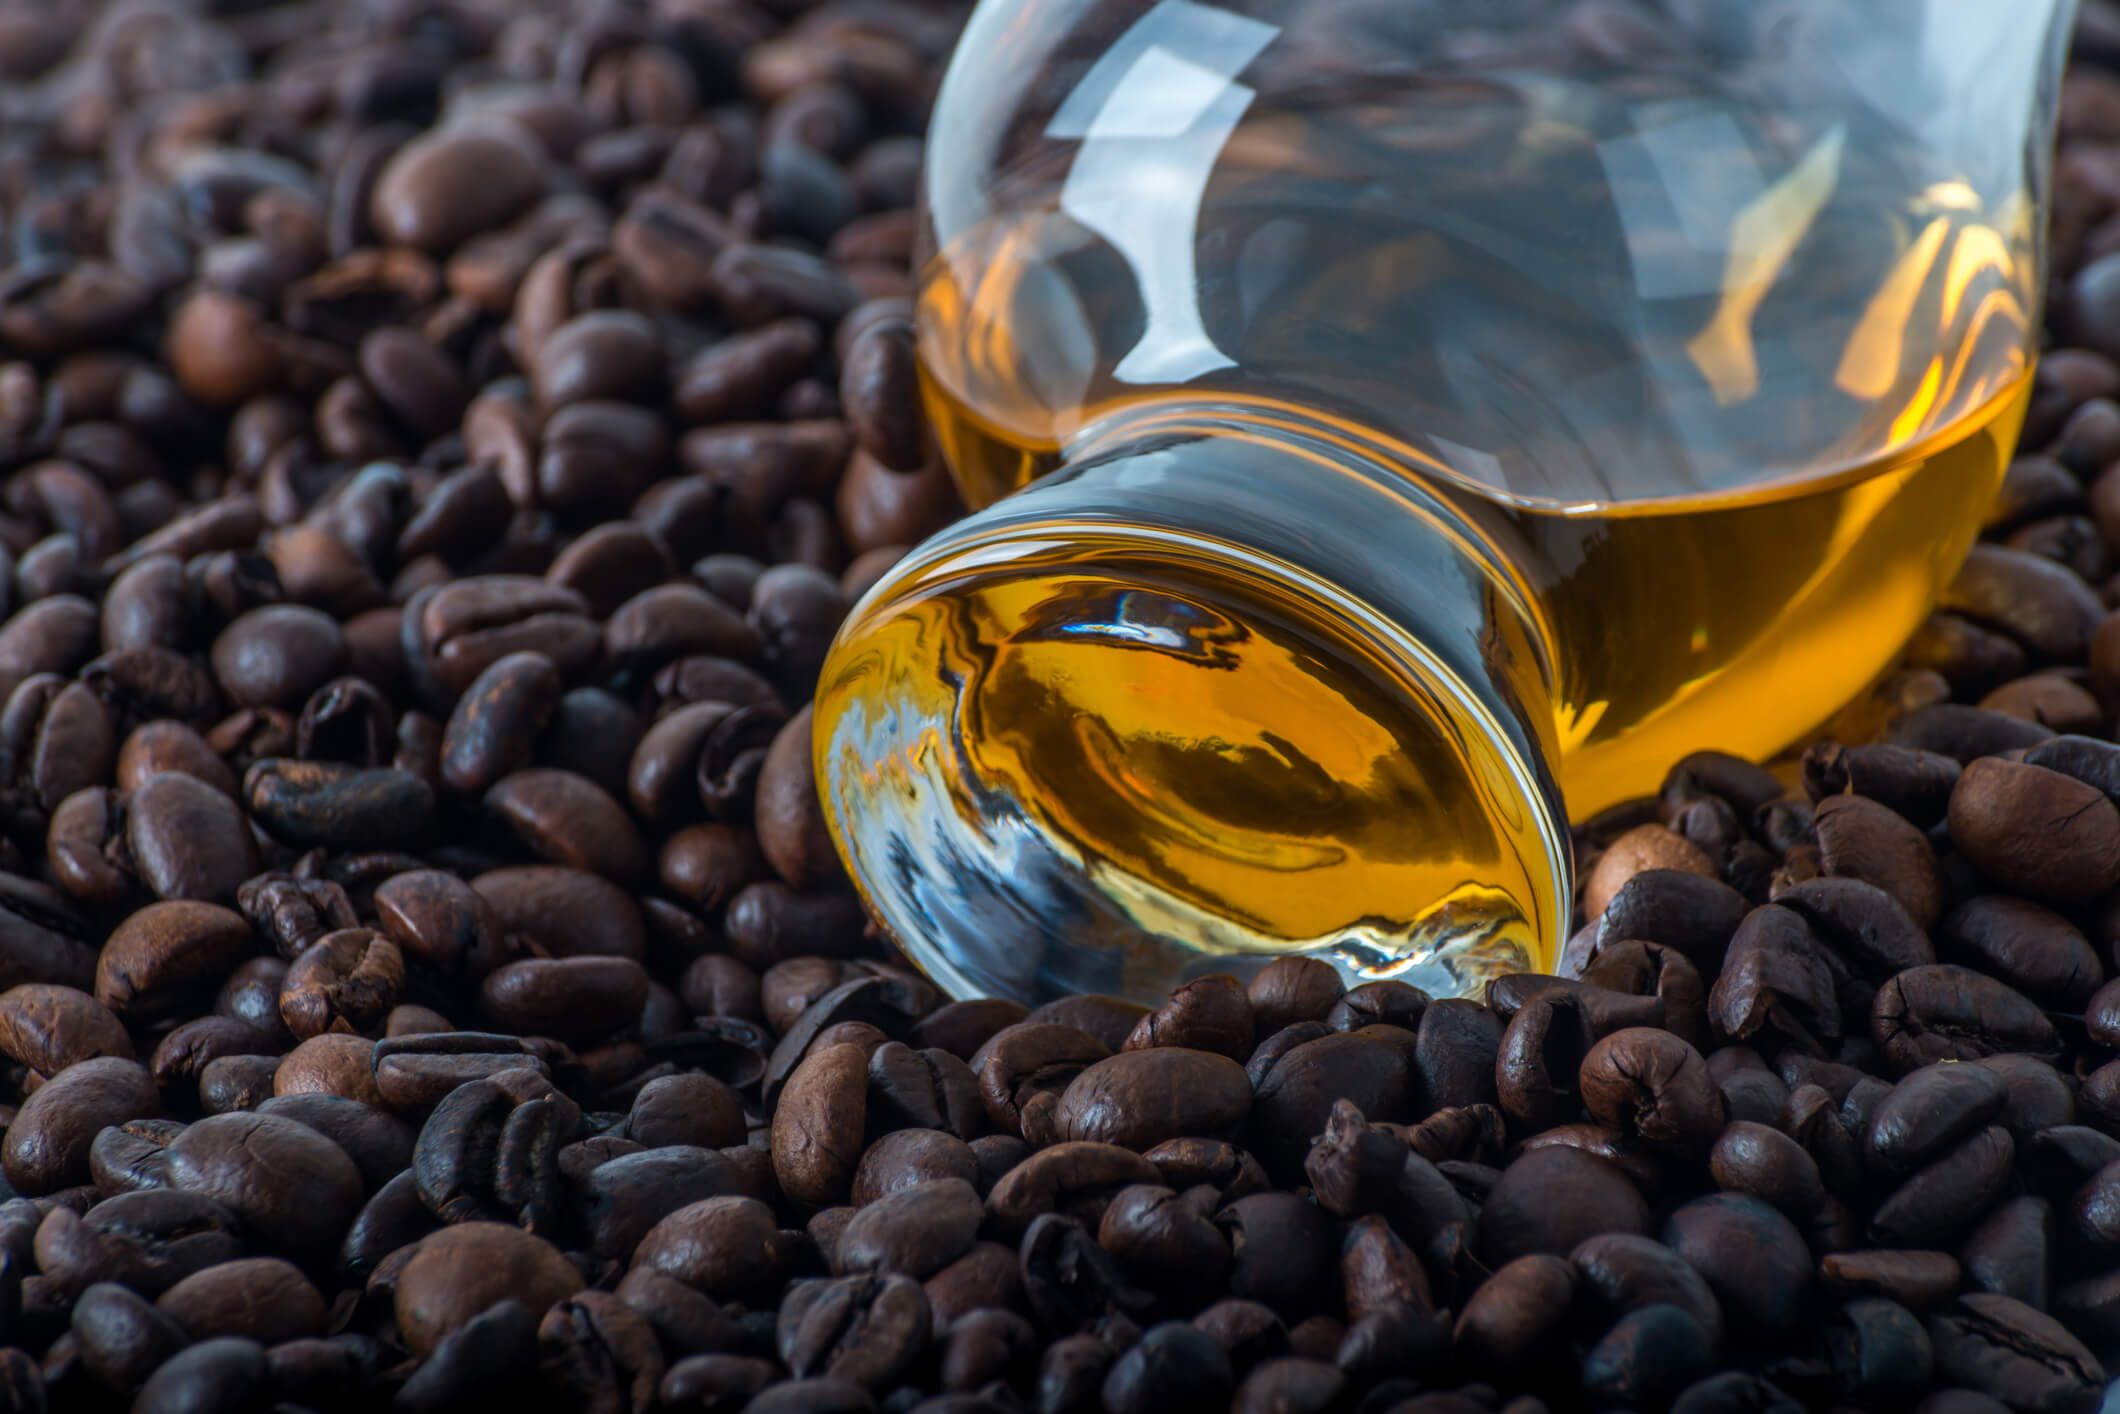 Glencairn whisky glass atop coffee beans